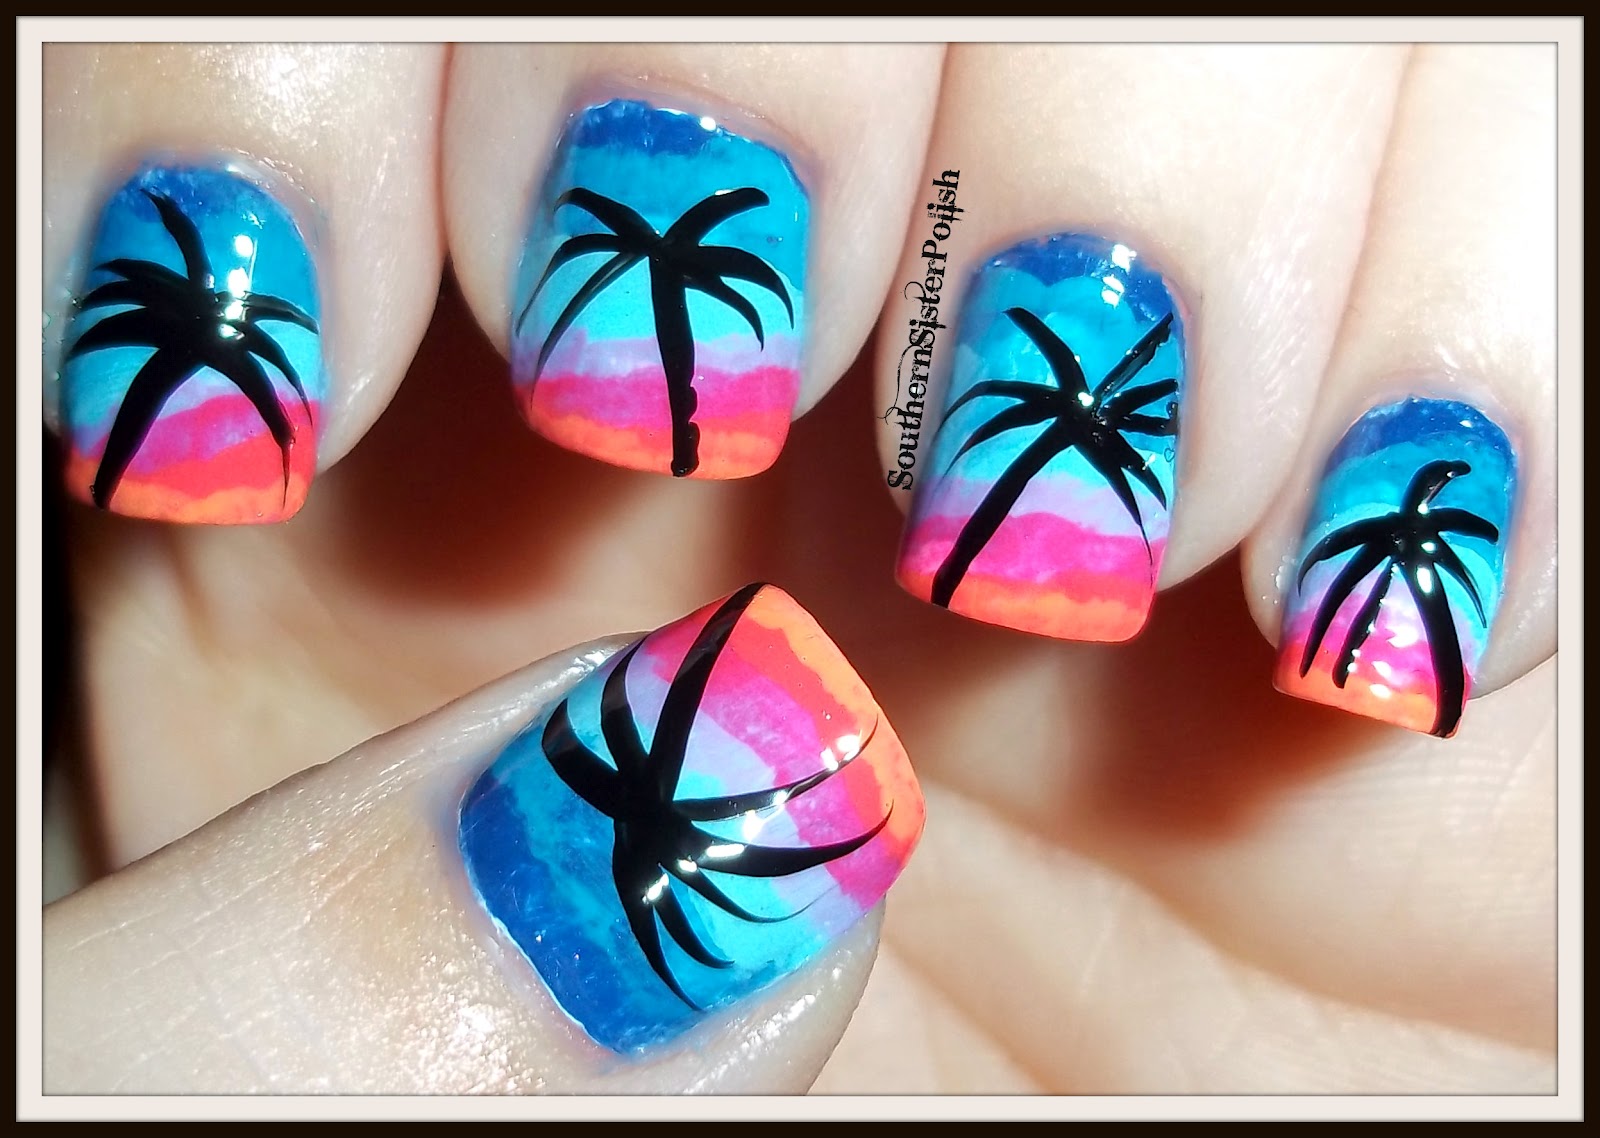 Beach Nail Art Designs for Vacation - wide 11